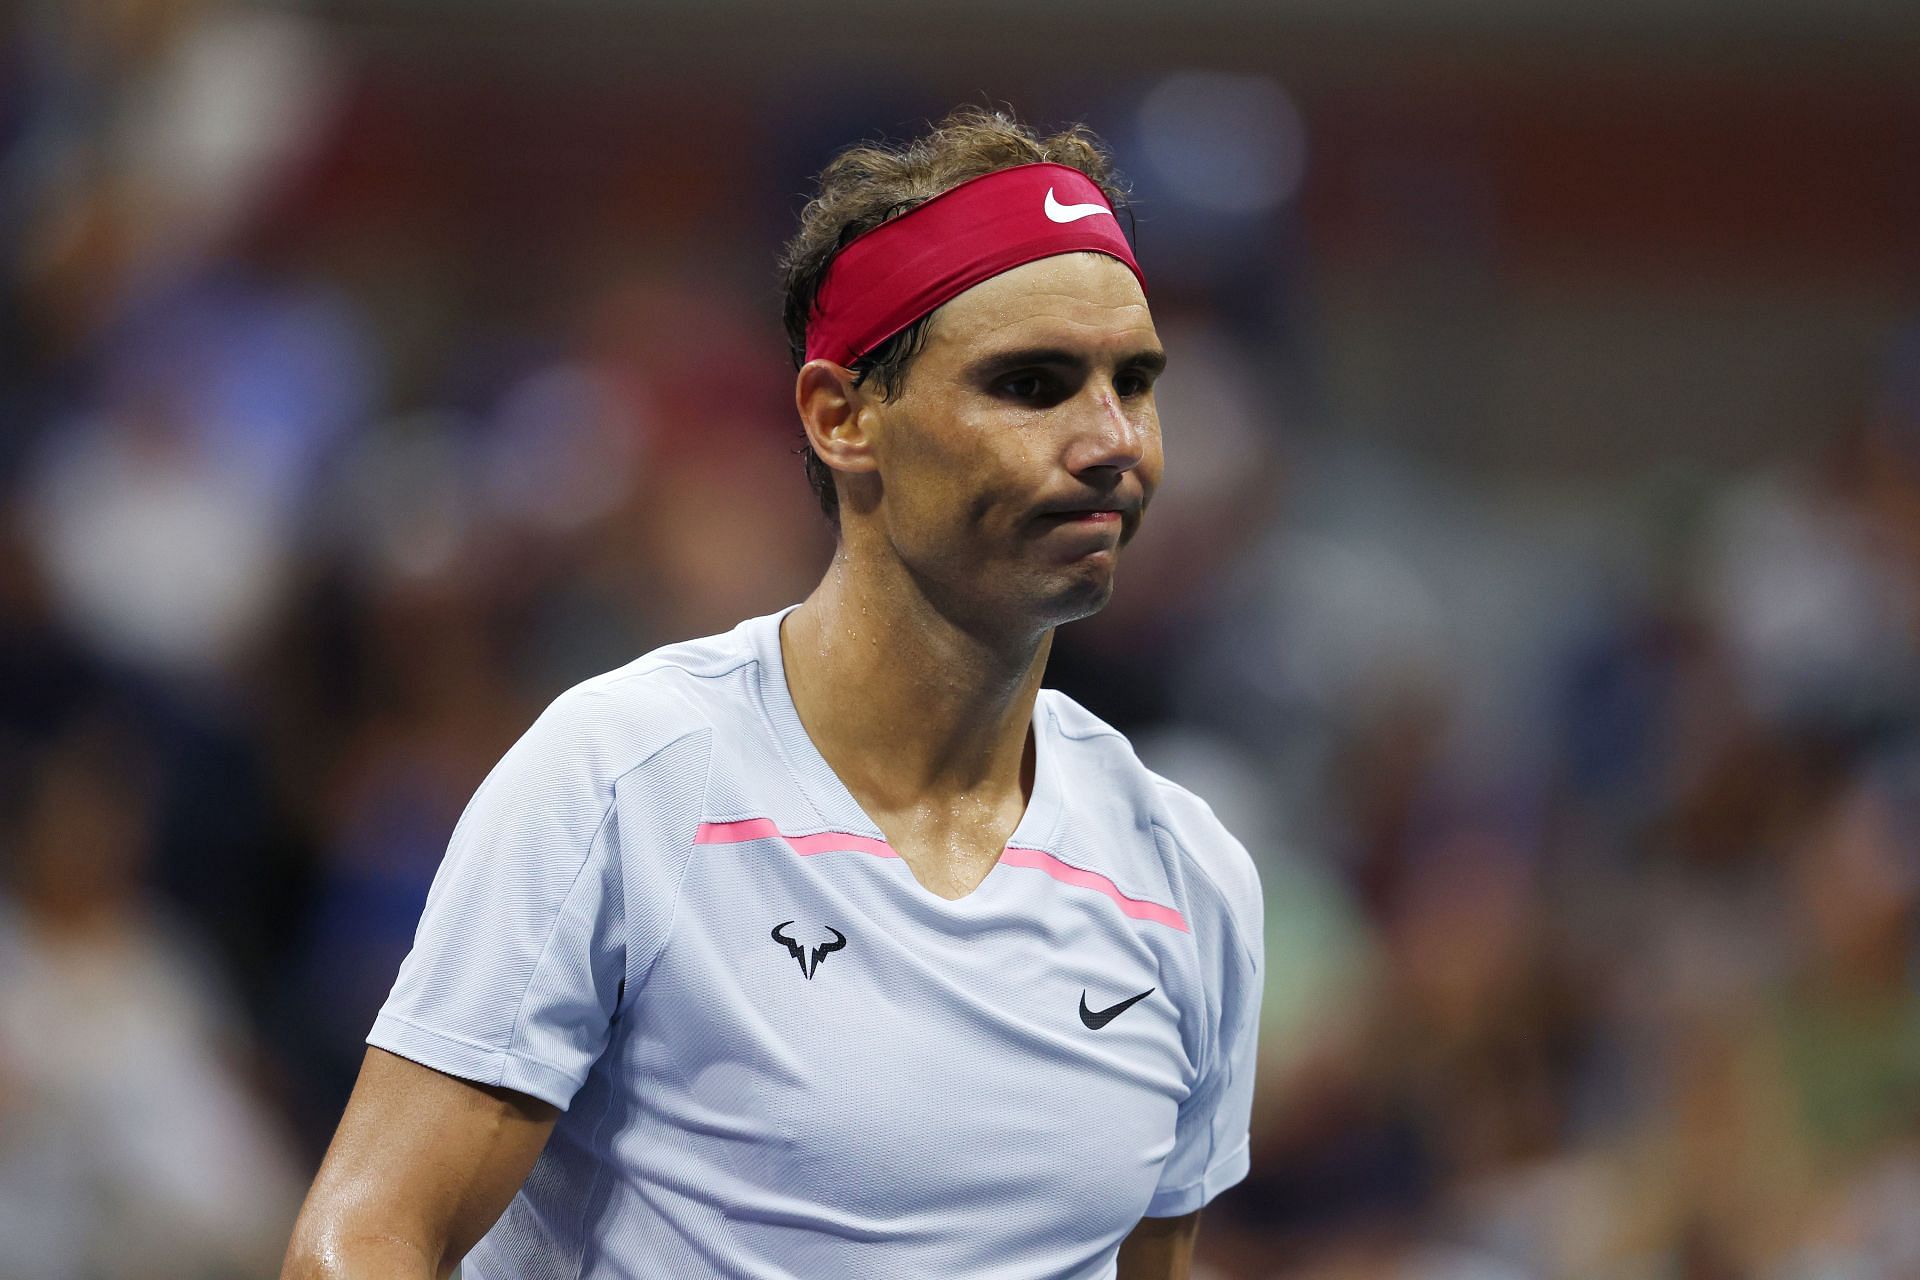 Rafael Nadal was eliminated in the fourth round of the US Open